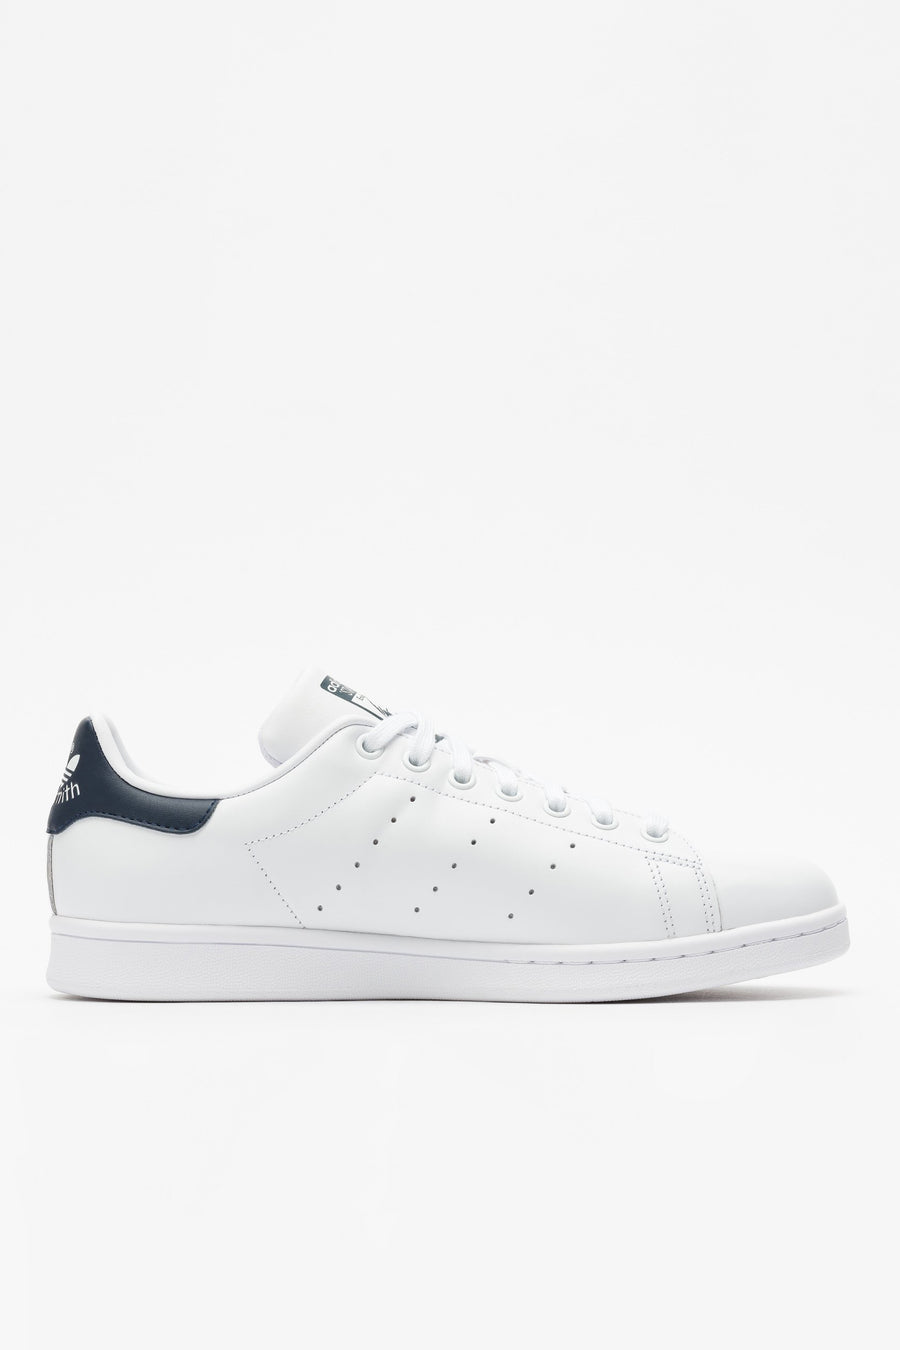 stan smith navy save 60% discount